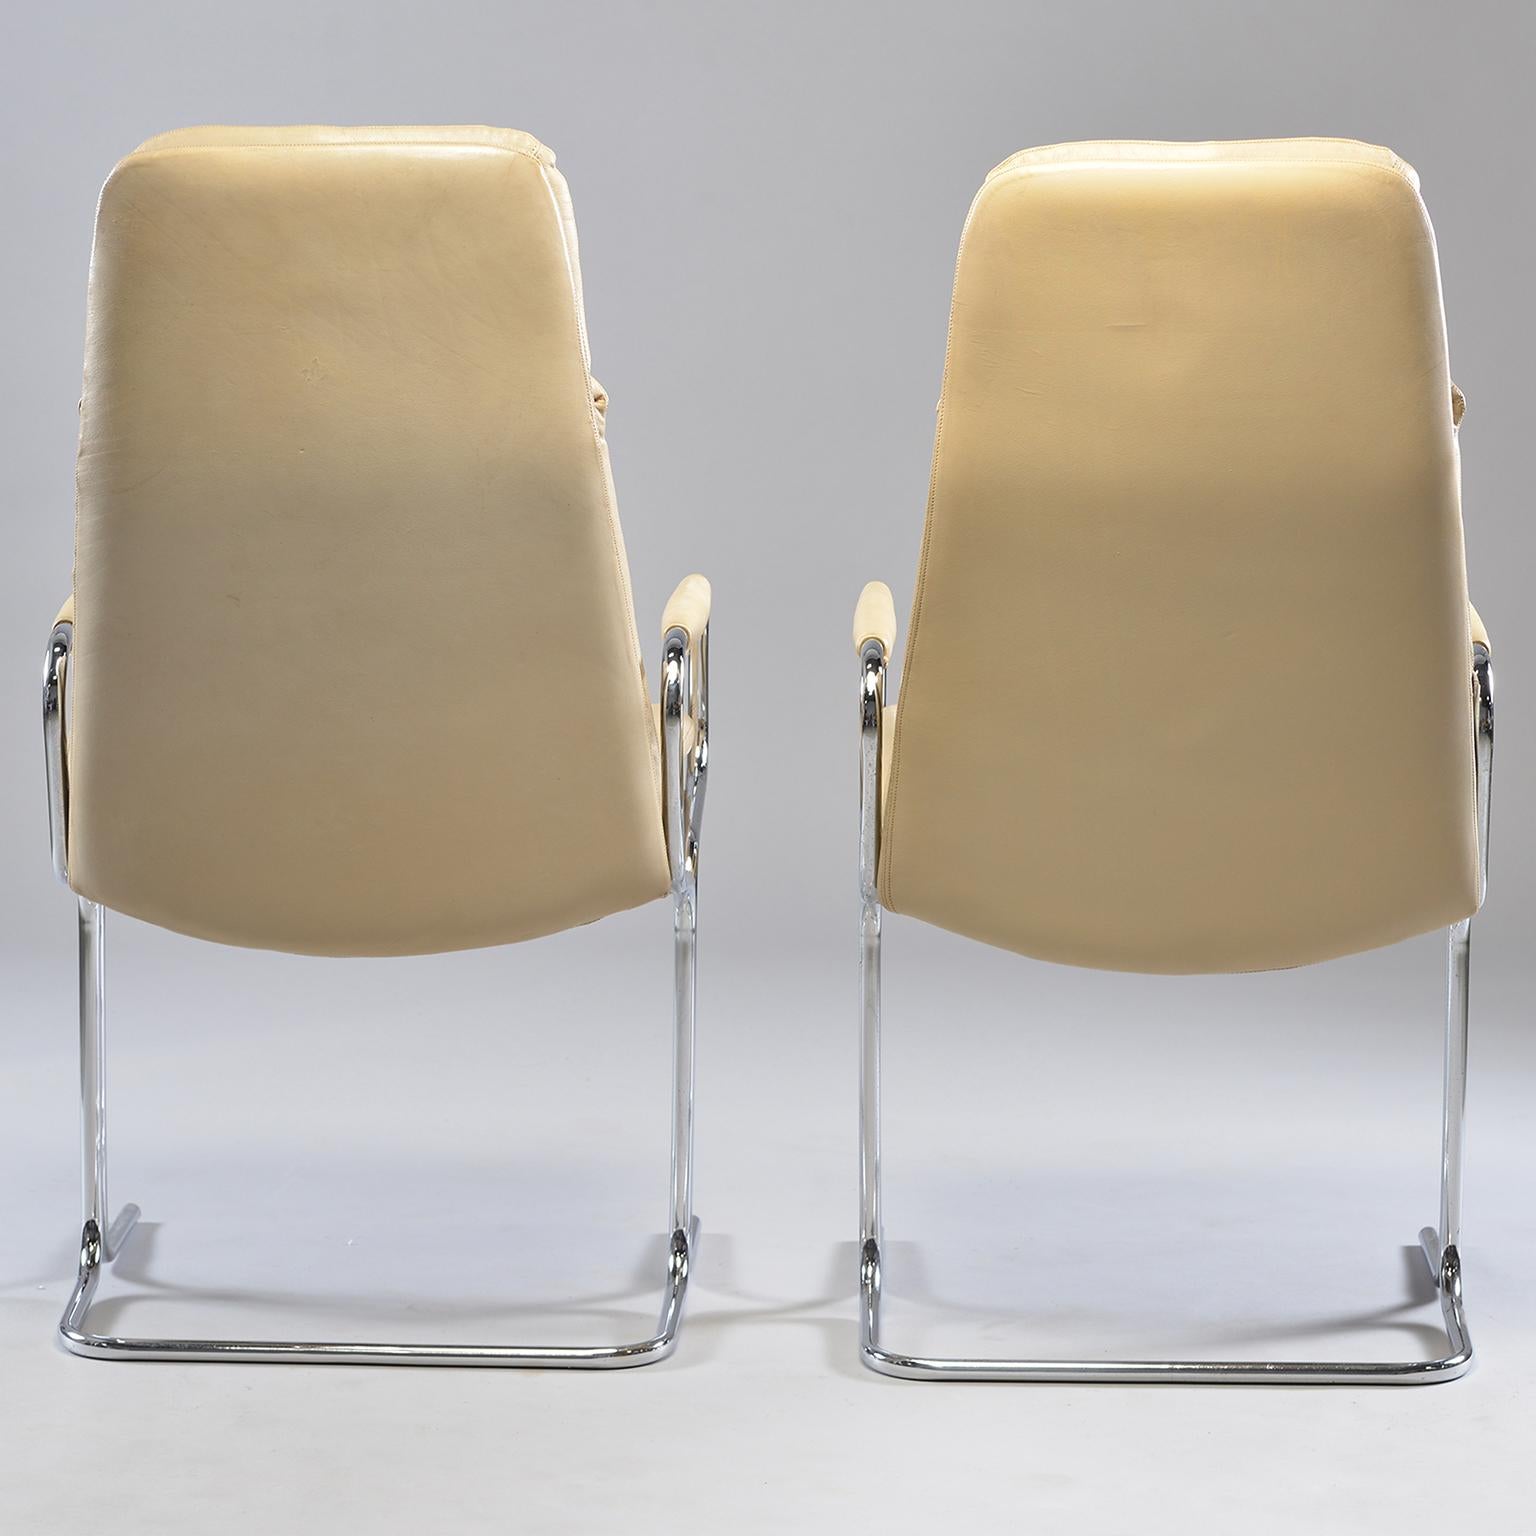 English Pair of Armchairs by Tim Bates for Eleganza Collection at Pieff